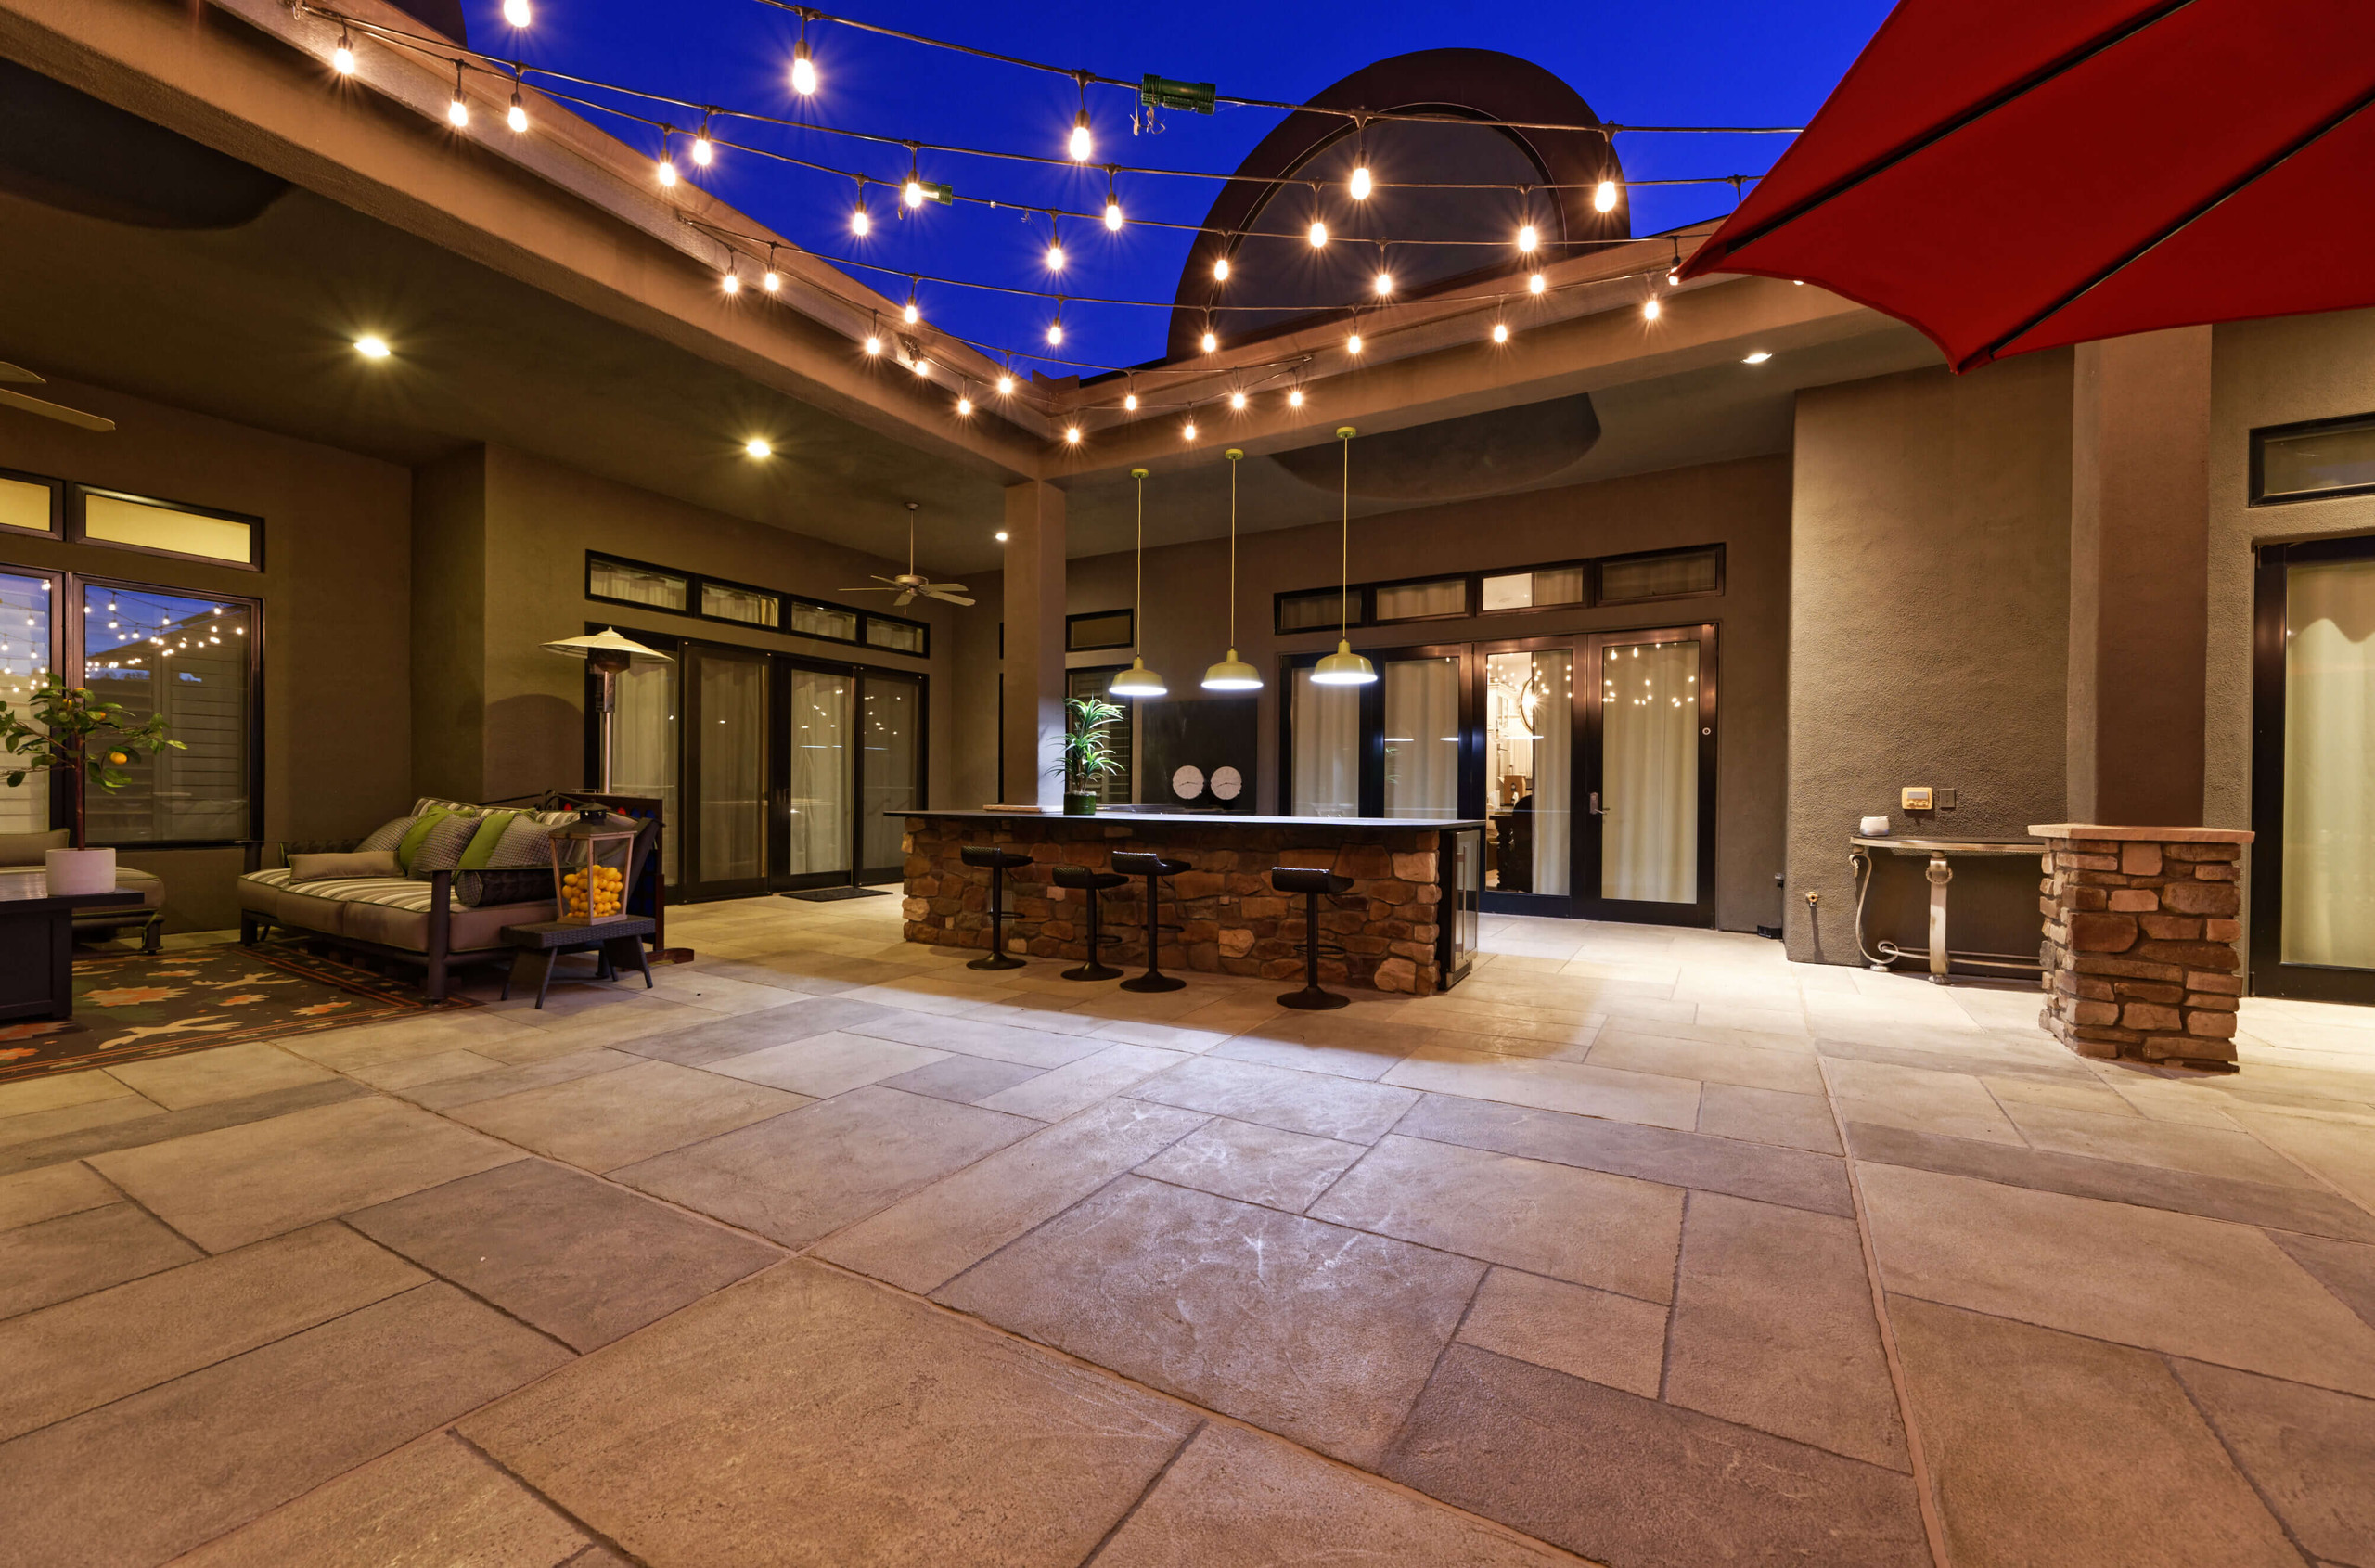 Gorgeous outdoor living space with string lights and spacious seating areas